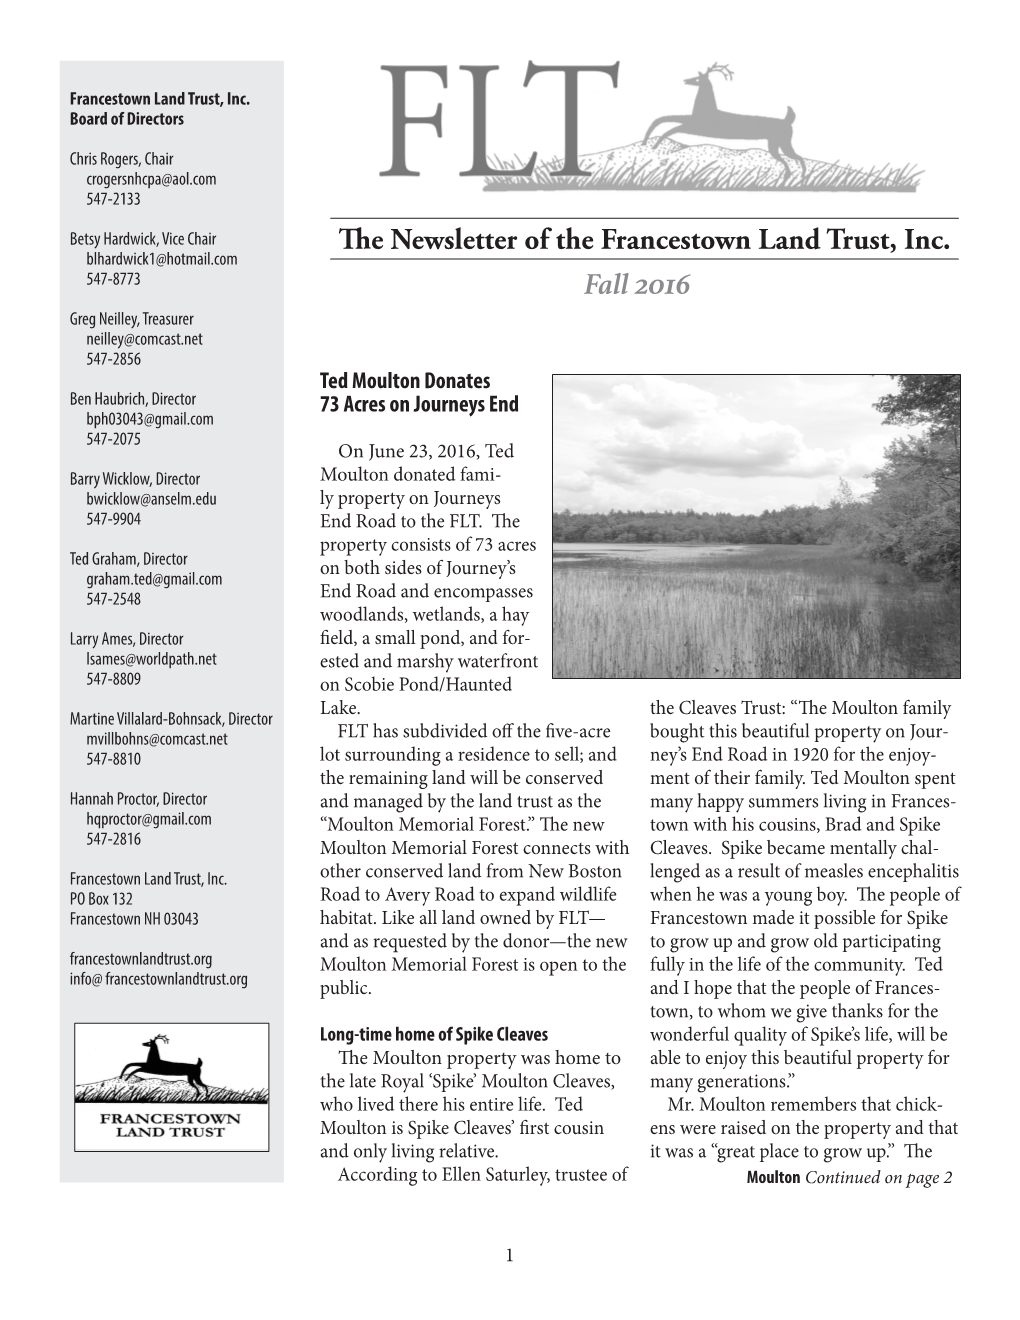 The Newsletter of the Francestown Land Trust, Inc. Fall 2016